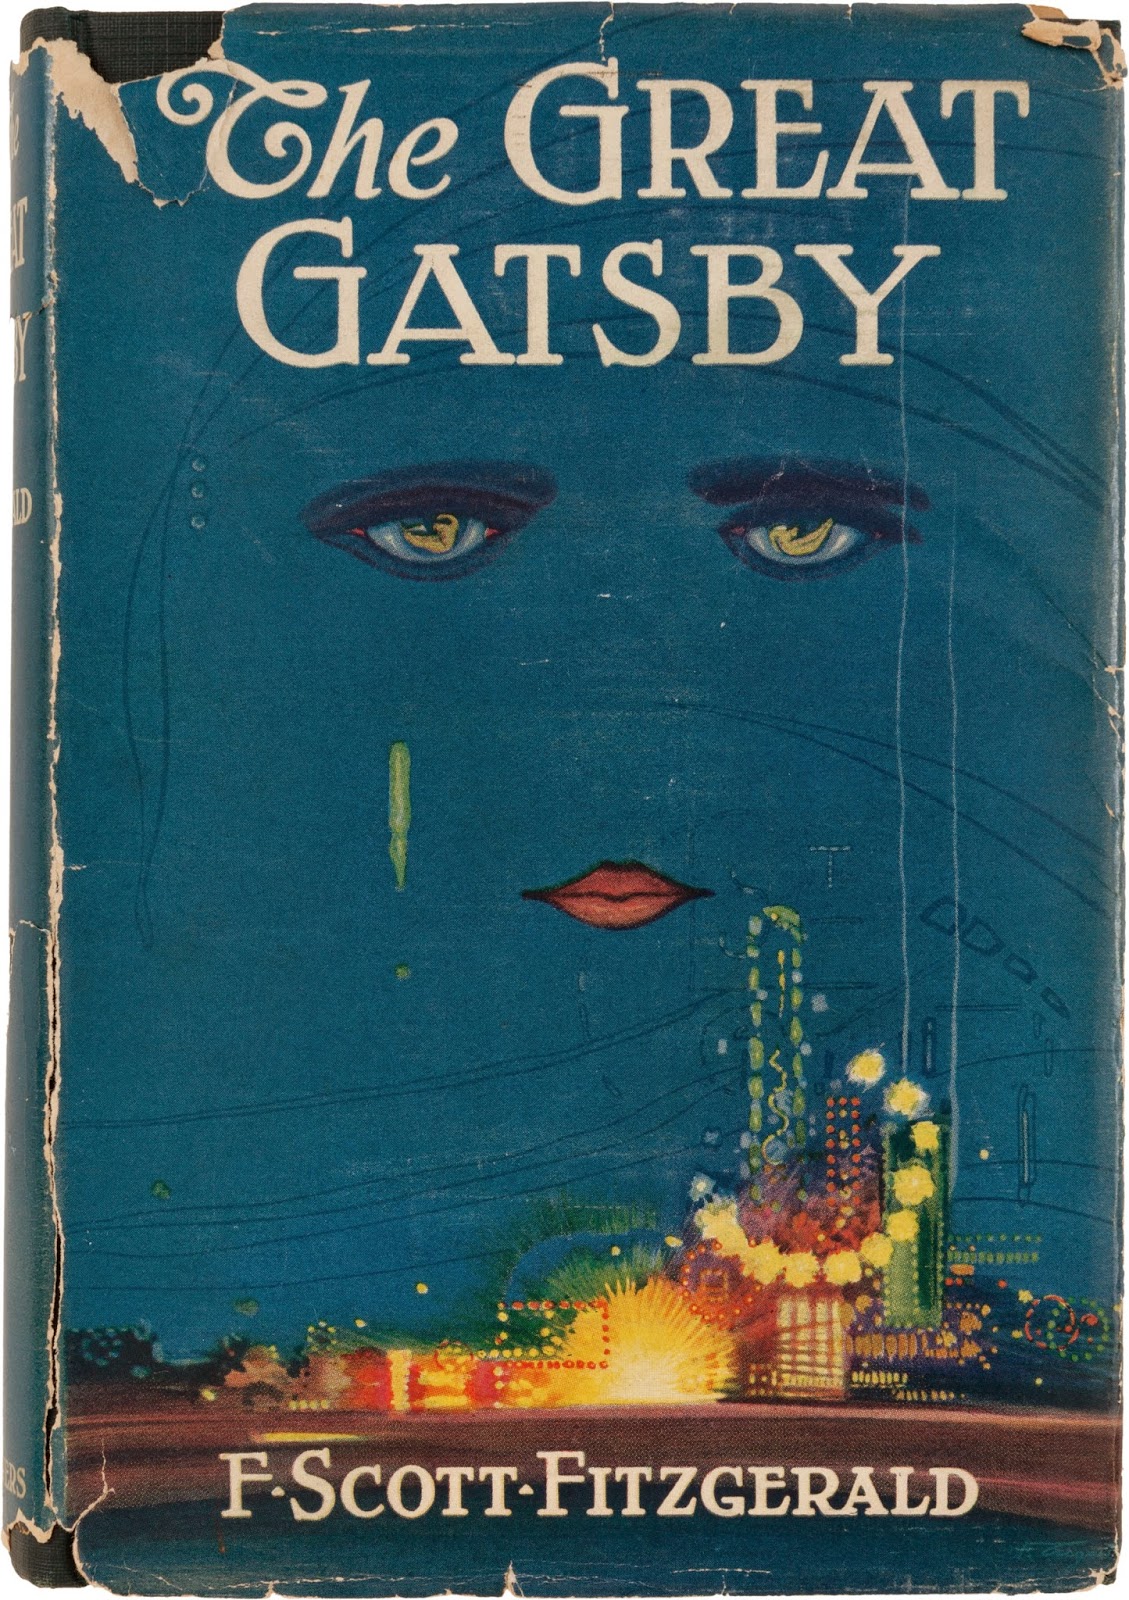 The Great Gatsby audiobook - An American fantasy